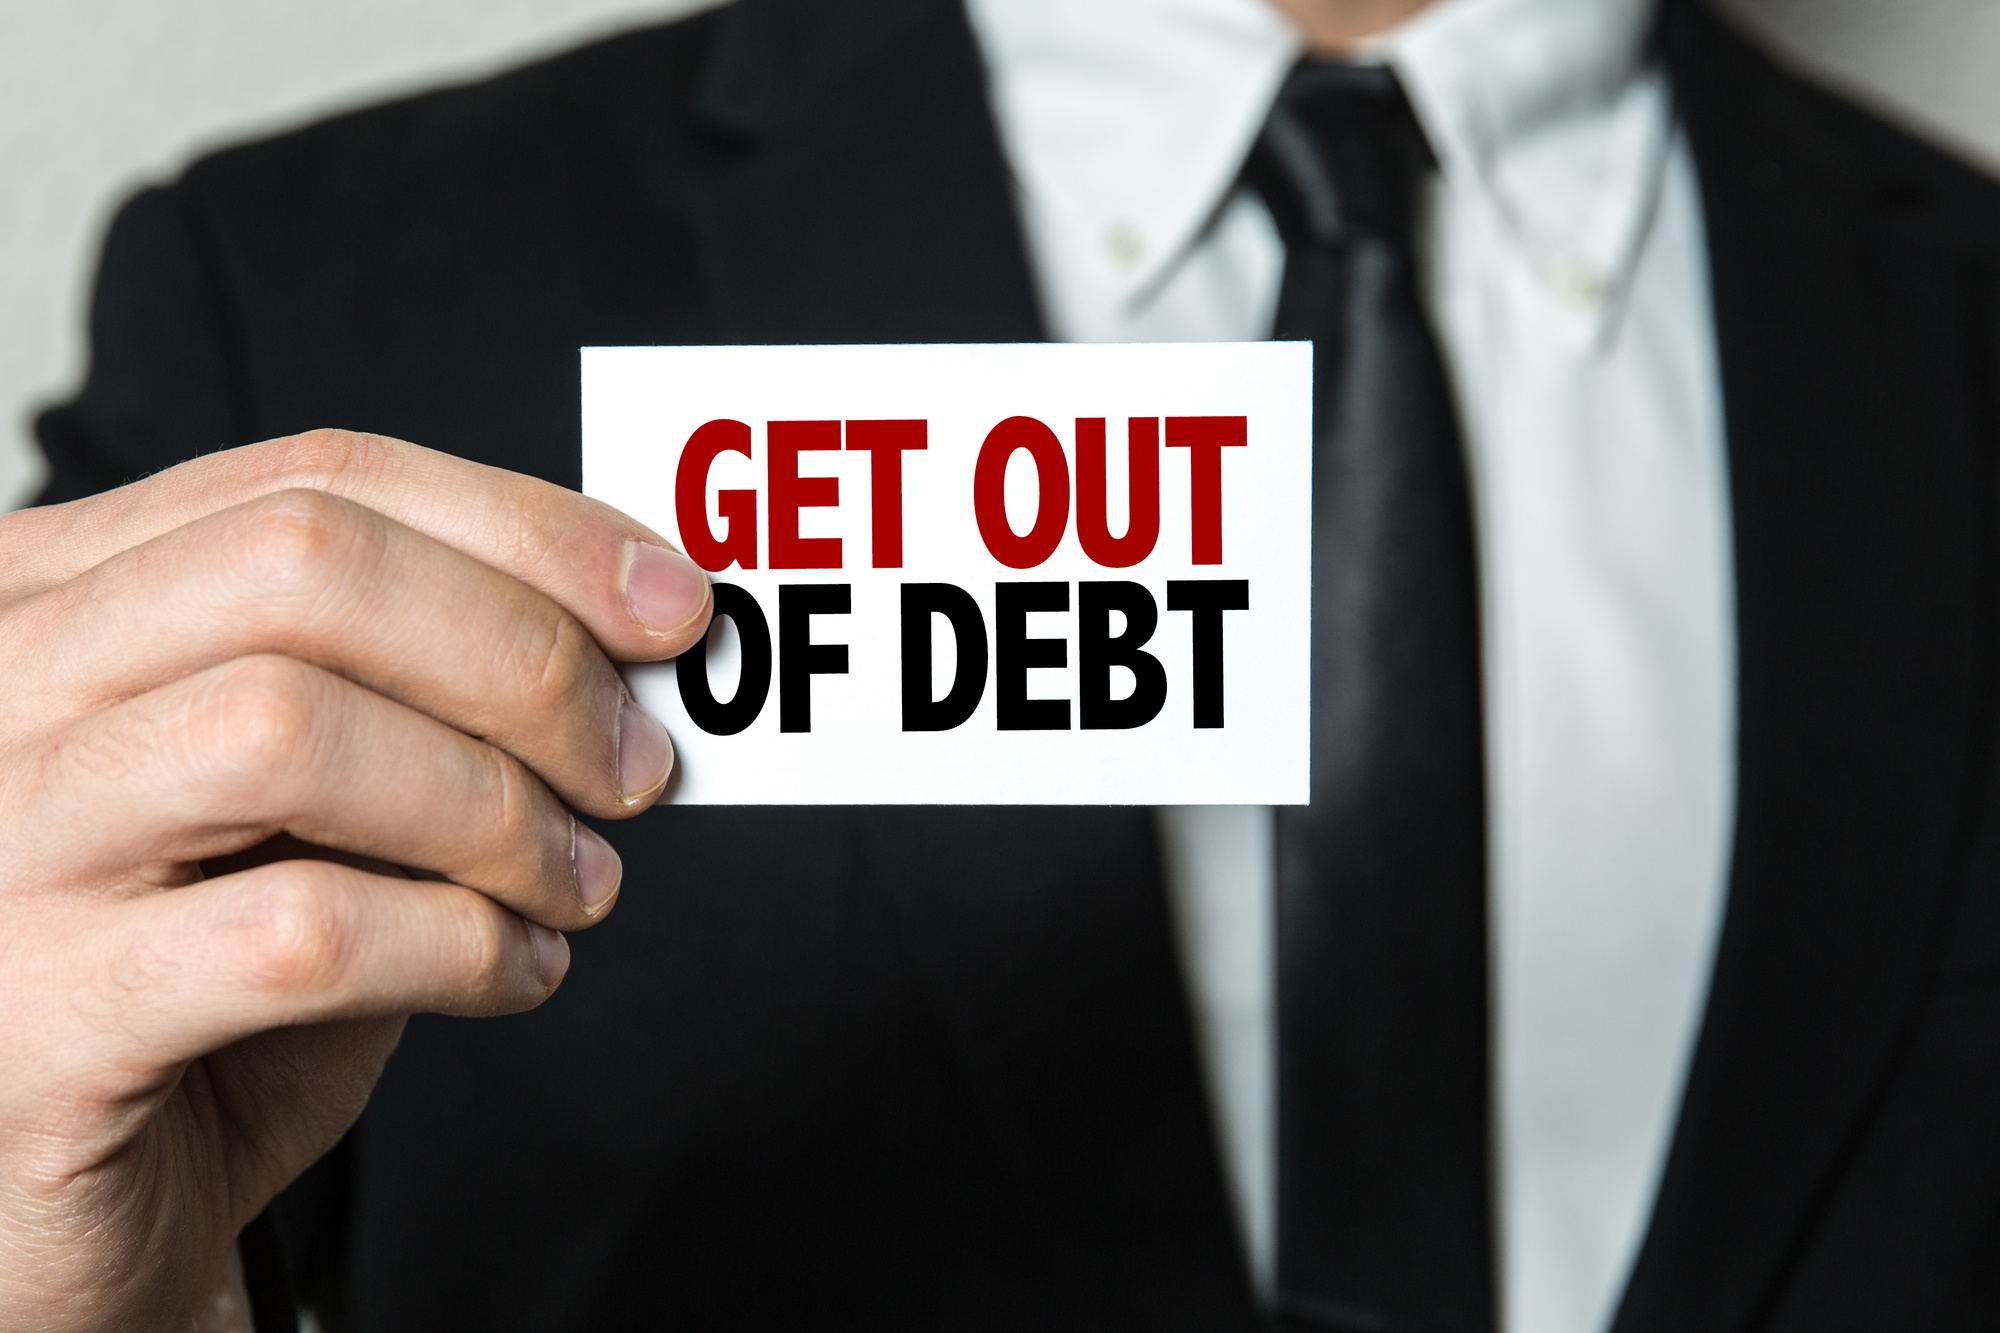 7 tips to get out of debt, geek insider